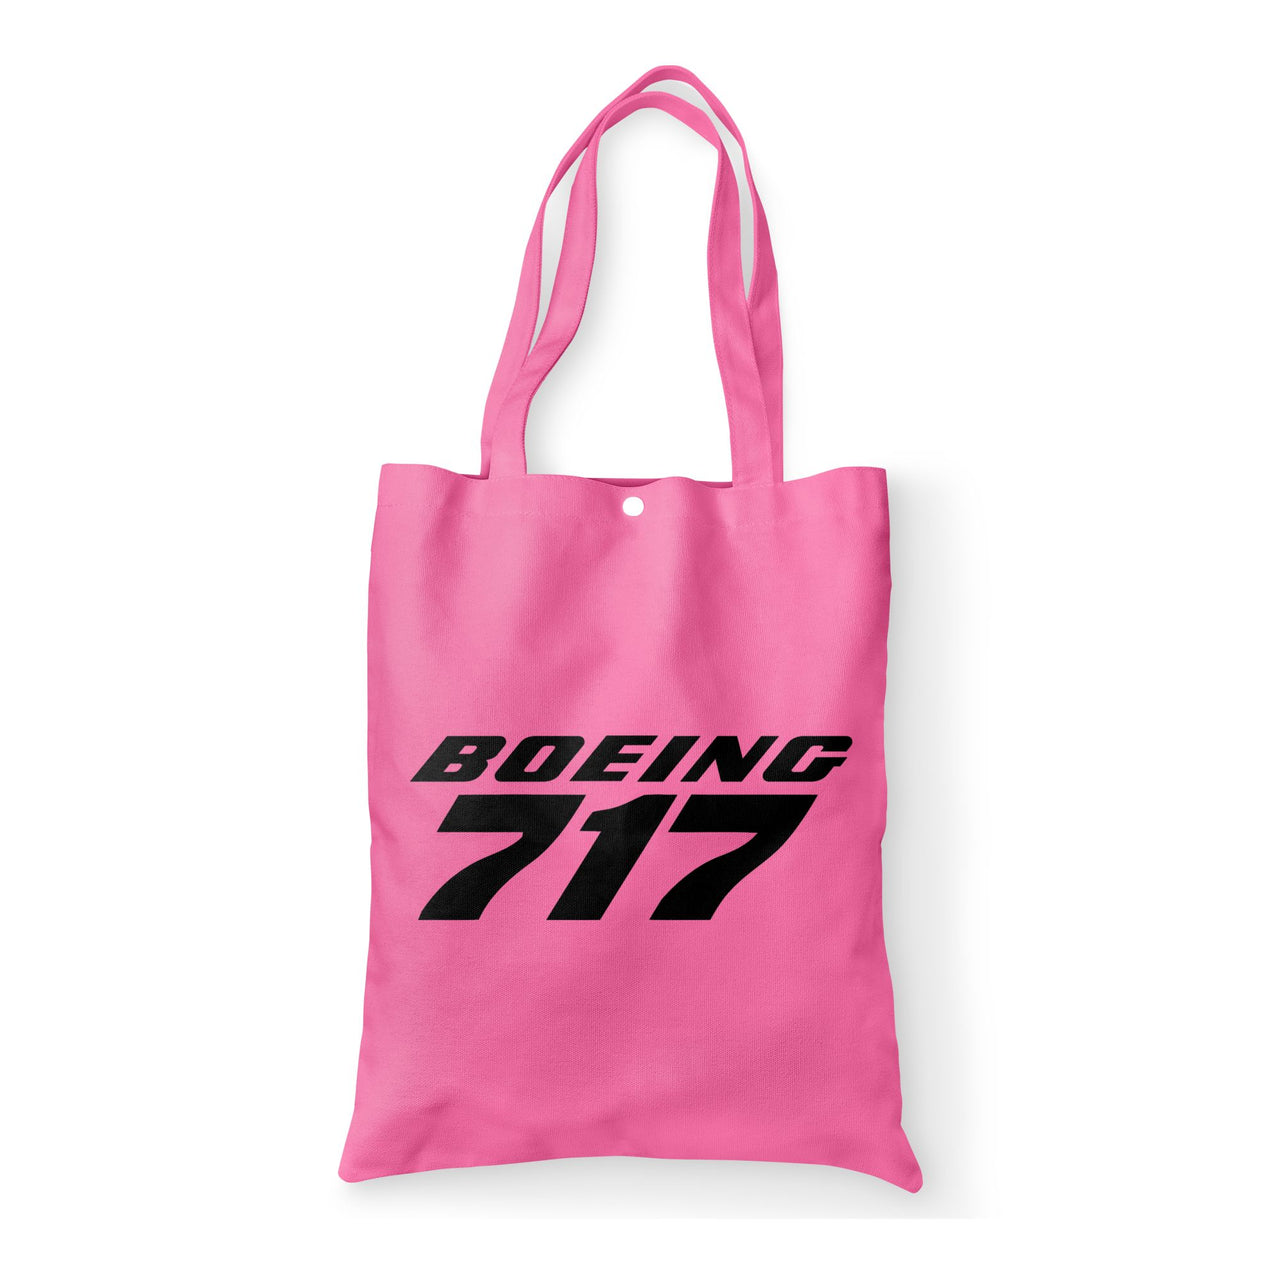 Boeing 717 & Text Designed Tote Bags